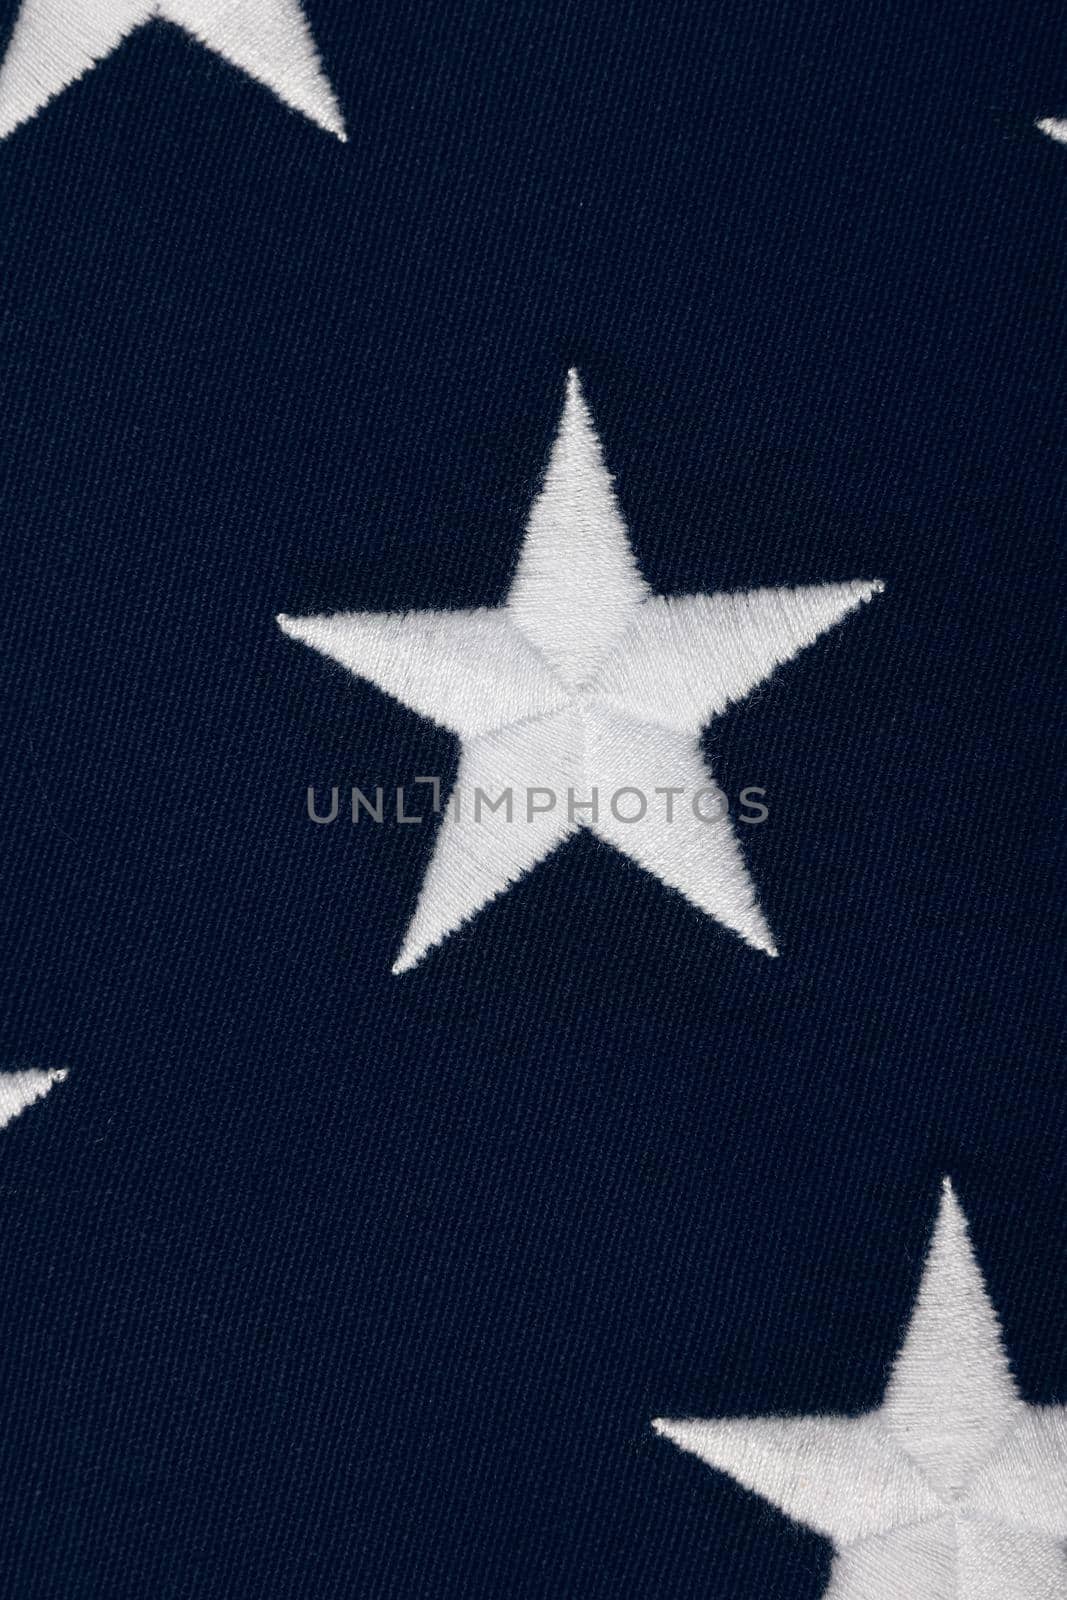 Embroidered stars of American flag blue canton by BreakingTheWalls